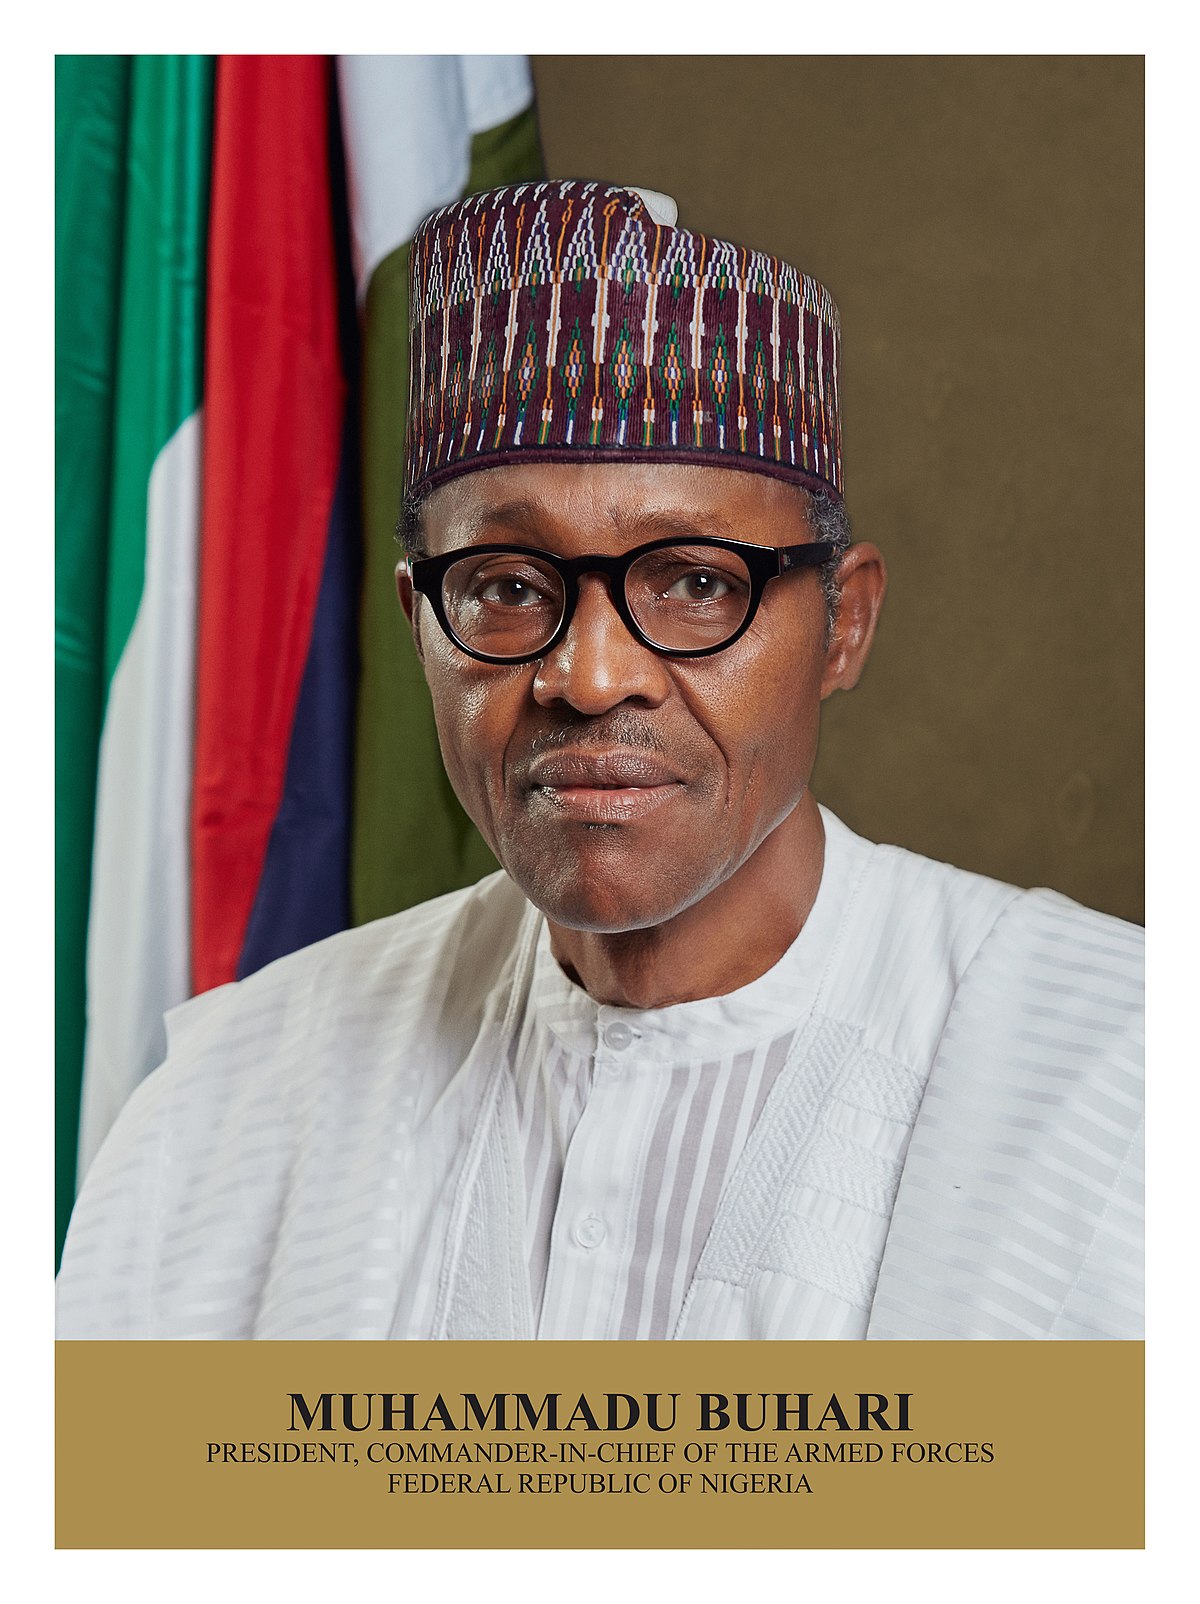 Nigeria’s President, Buhari is 77 years old—official